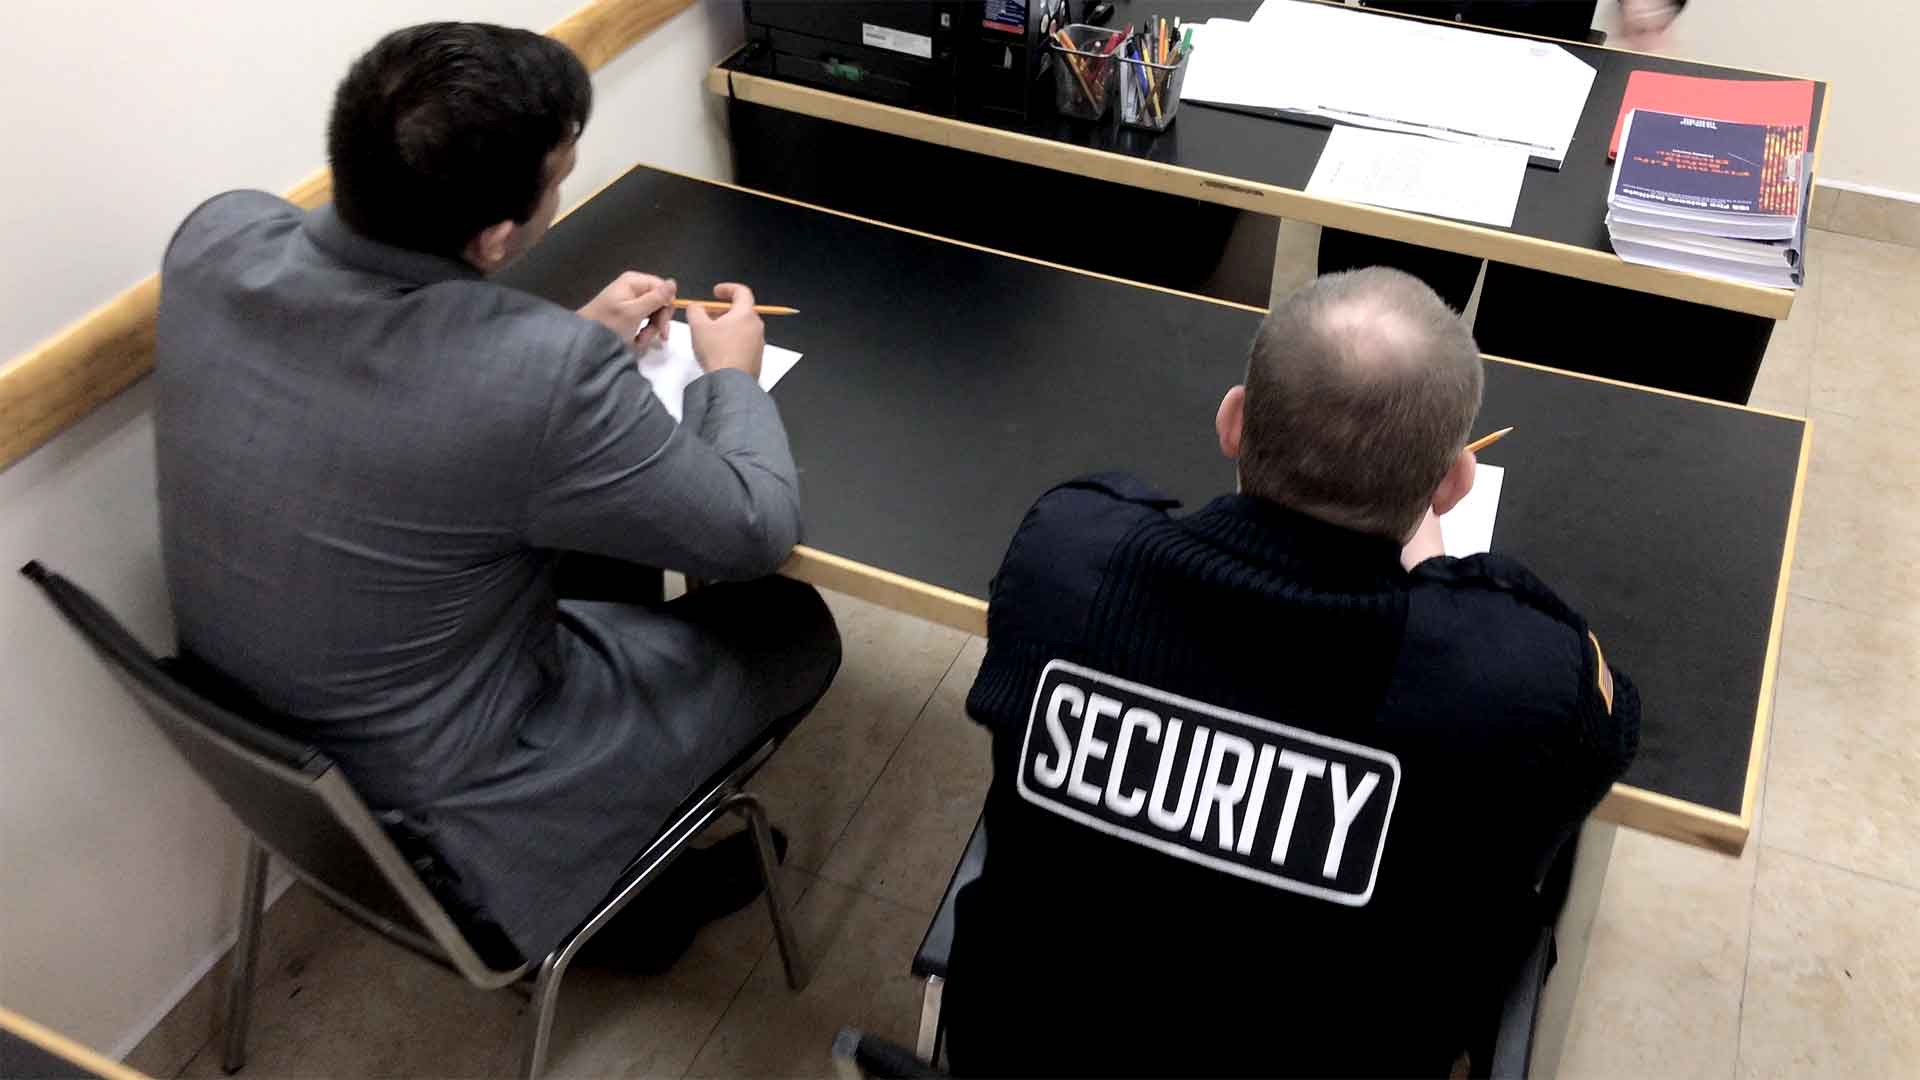 Security guard training class in Brooklyn's training center